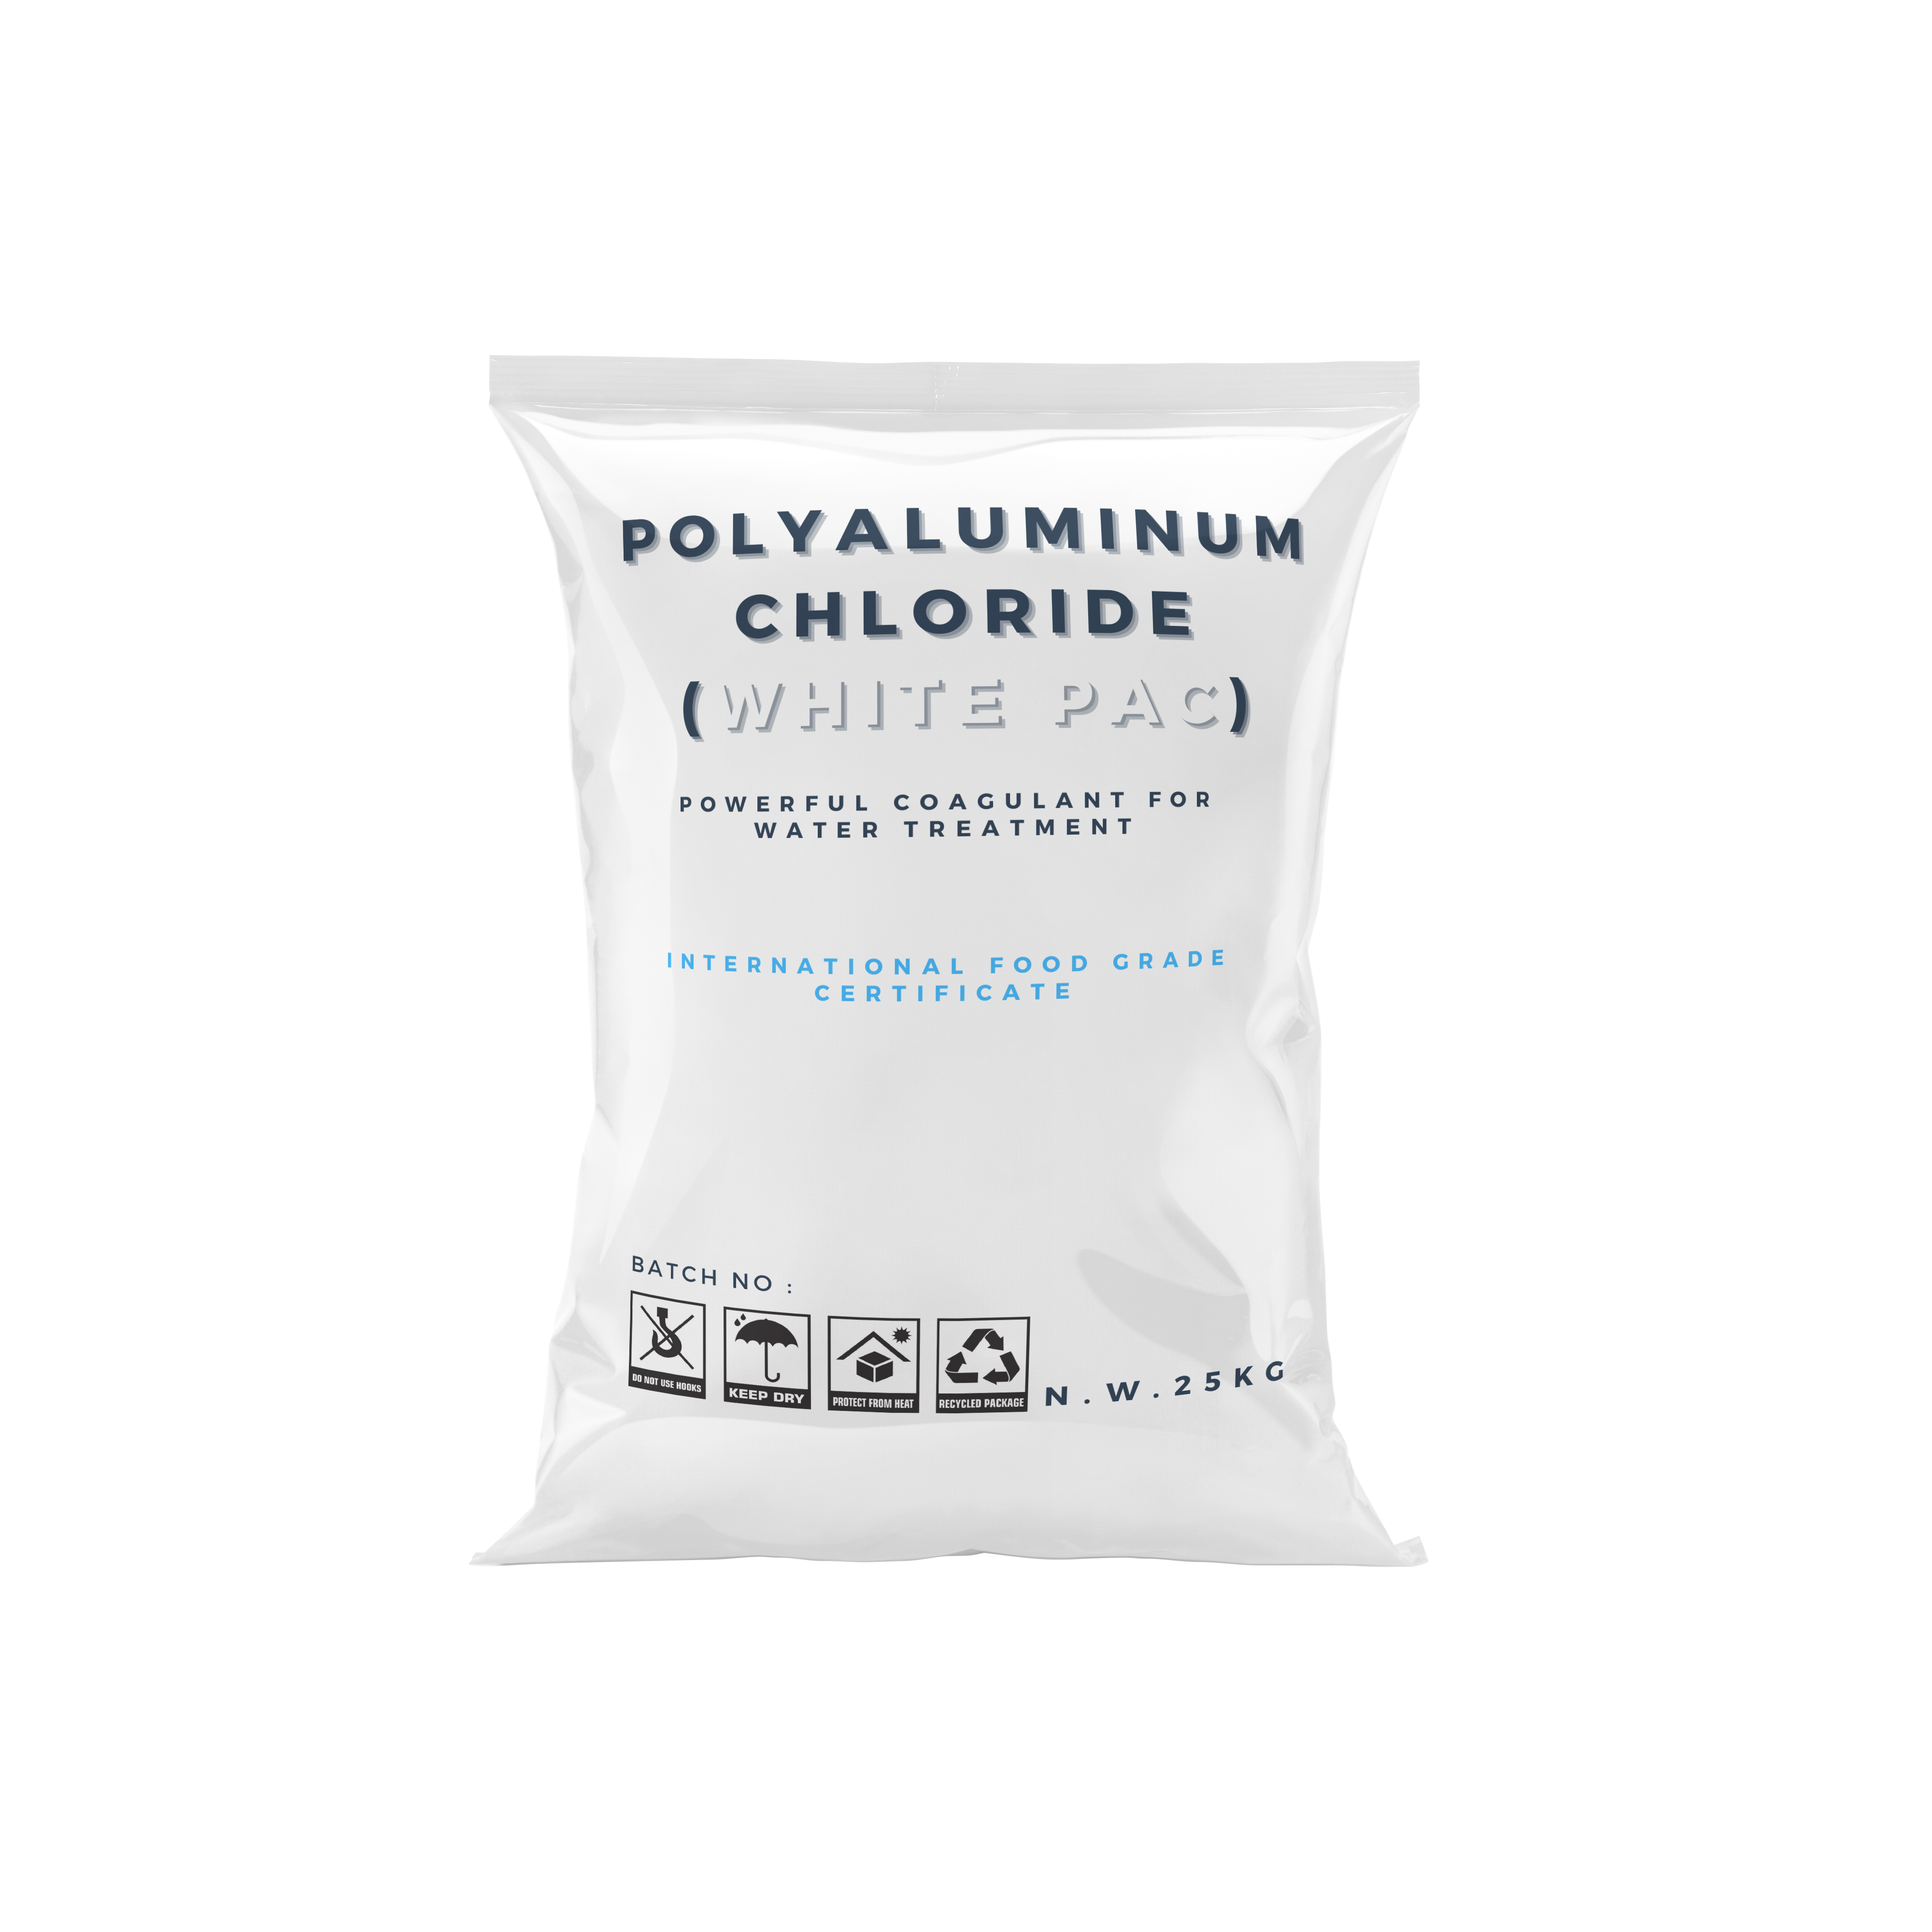 Poly aluminum chloride (WHITE PAC) 